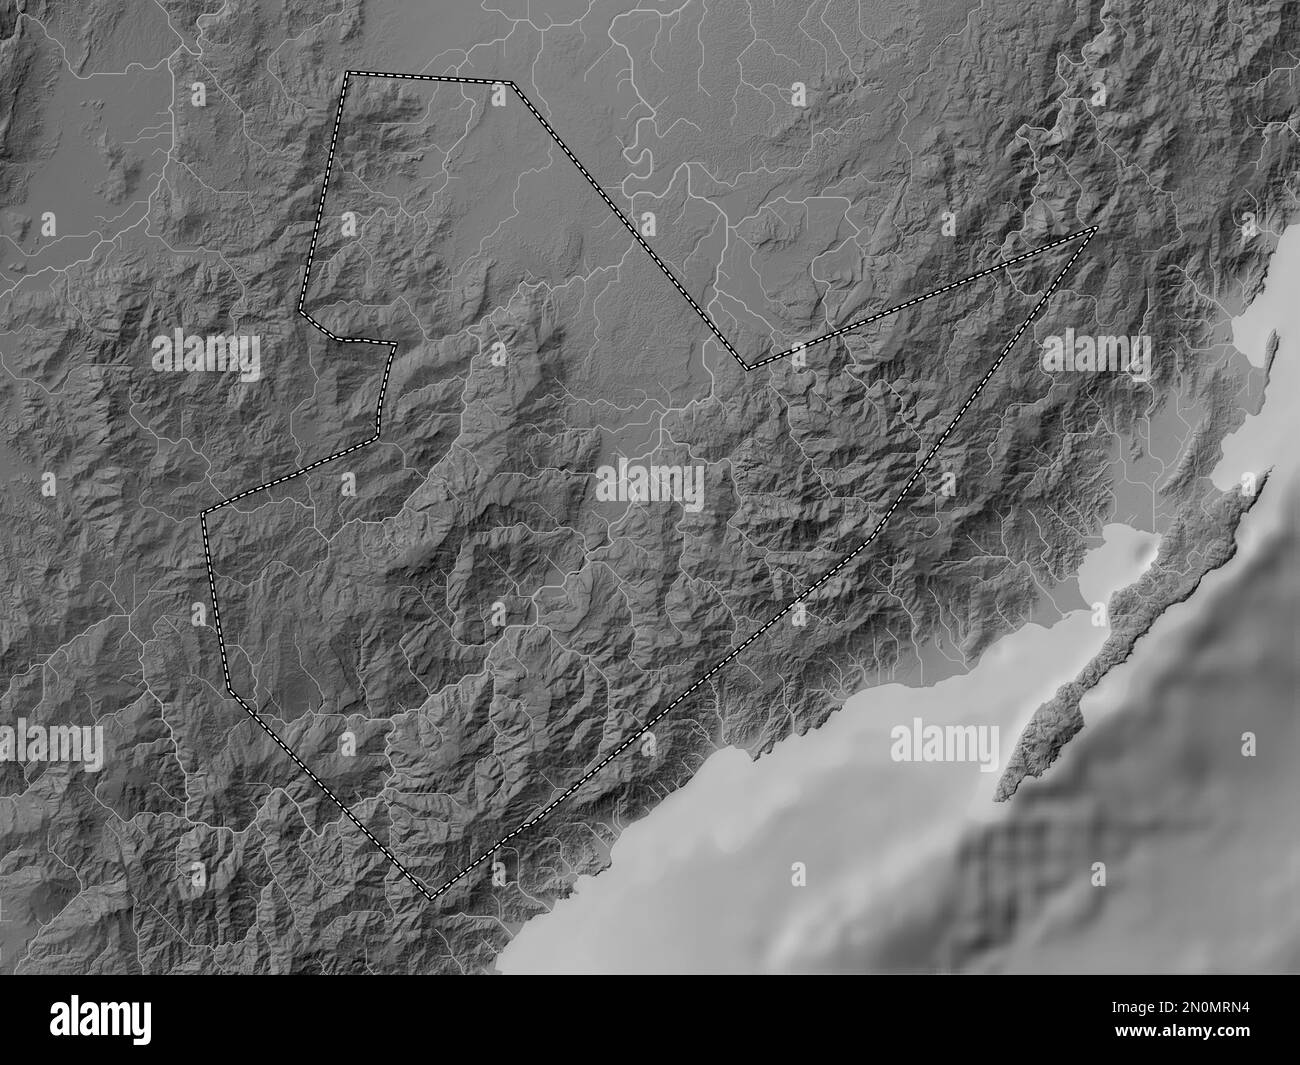 Quirino, province of Philippines. Grayscale elevation map with lakes and rivers Stock Photo